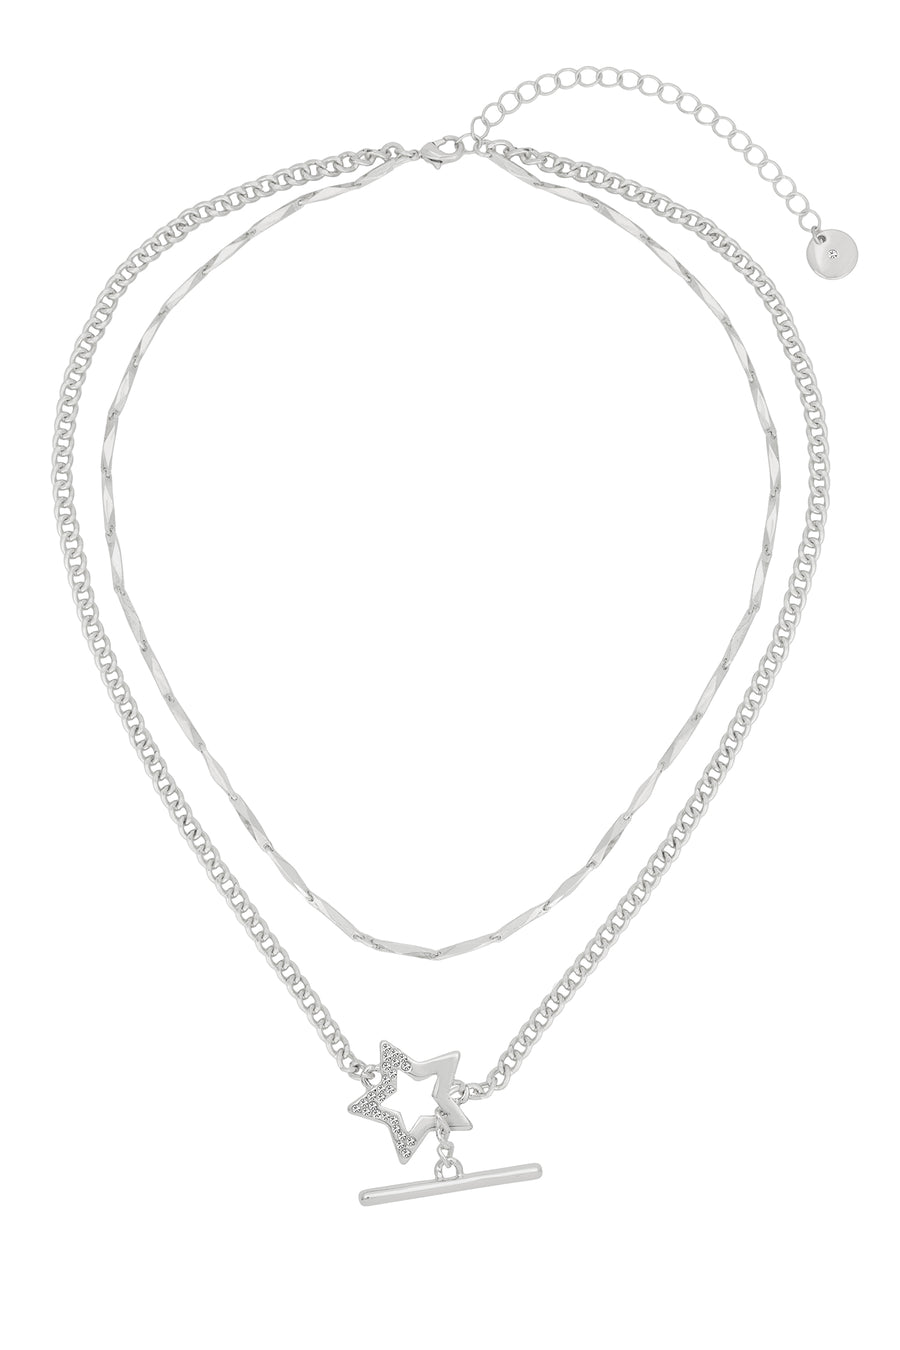 Michael Kors Jewellery Michael Kors Premium Sterling Silver 14k Yellow Gold  CZ Double Layered Necklace 43-49cm - Necklaces from Faith Jewellers UK